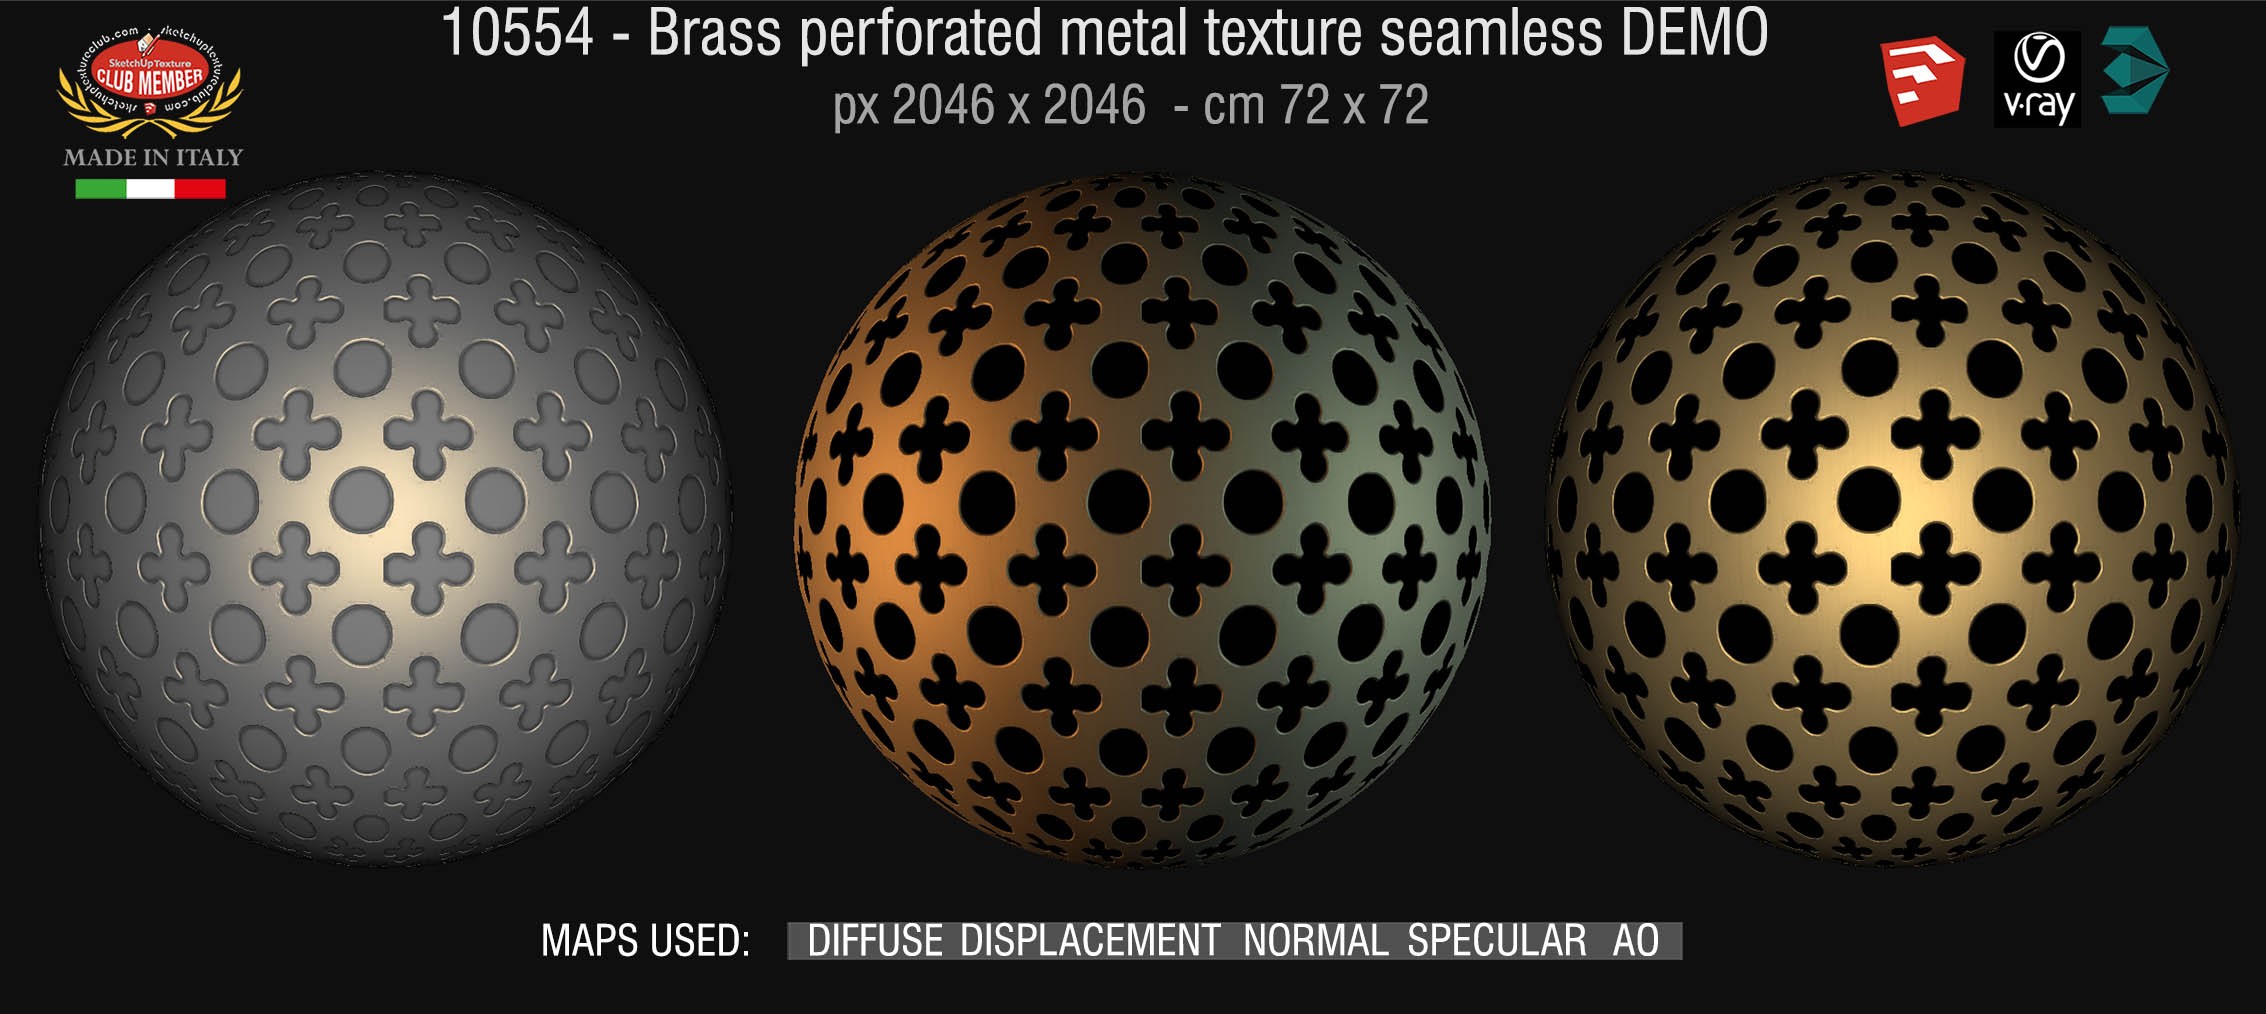 10554 HR Brass perforated metal texture seamless + maps DEMO